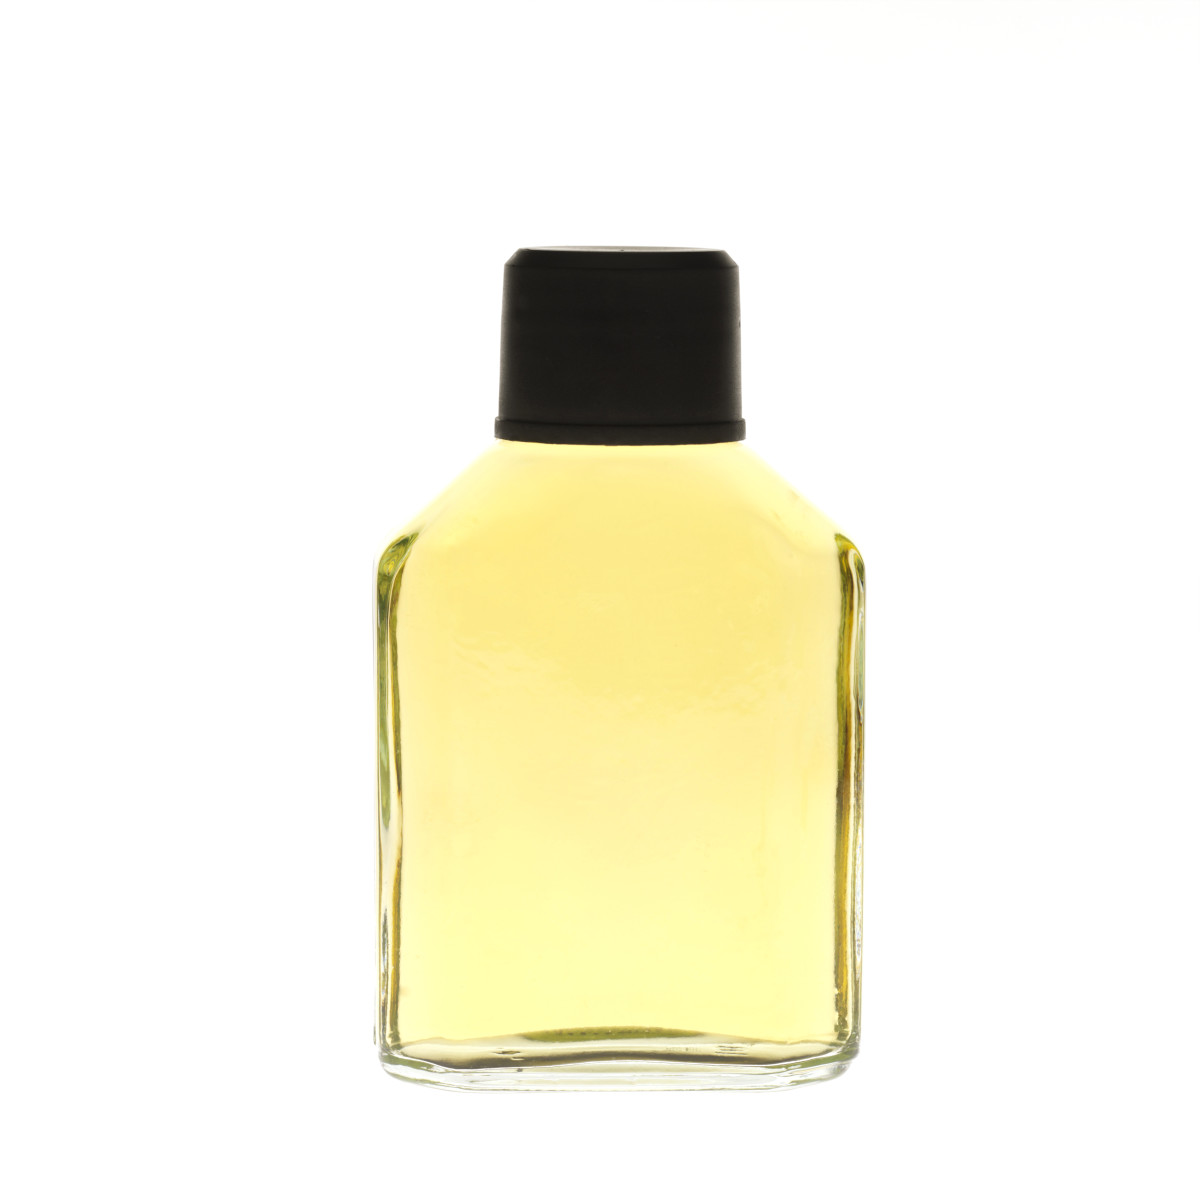 9 Signs You Need to Change Your Cologne - Men's Journal